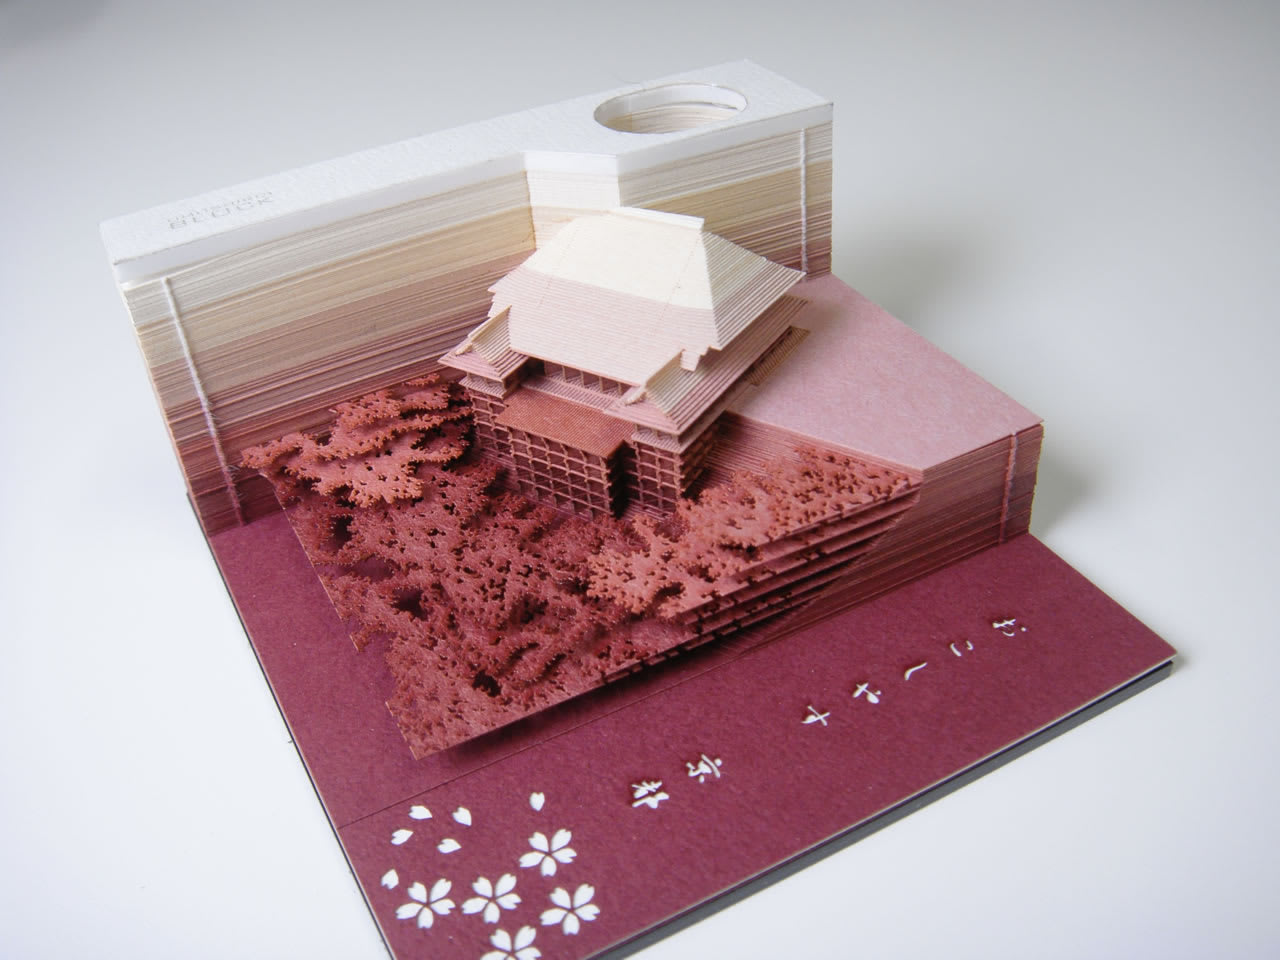 A Paper Memo Pad That Excavates Objects as It Gets Used — Colossal